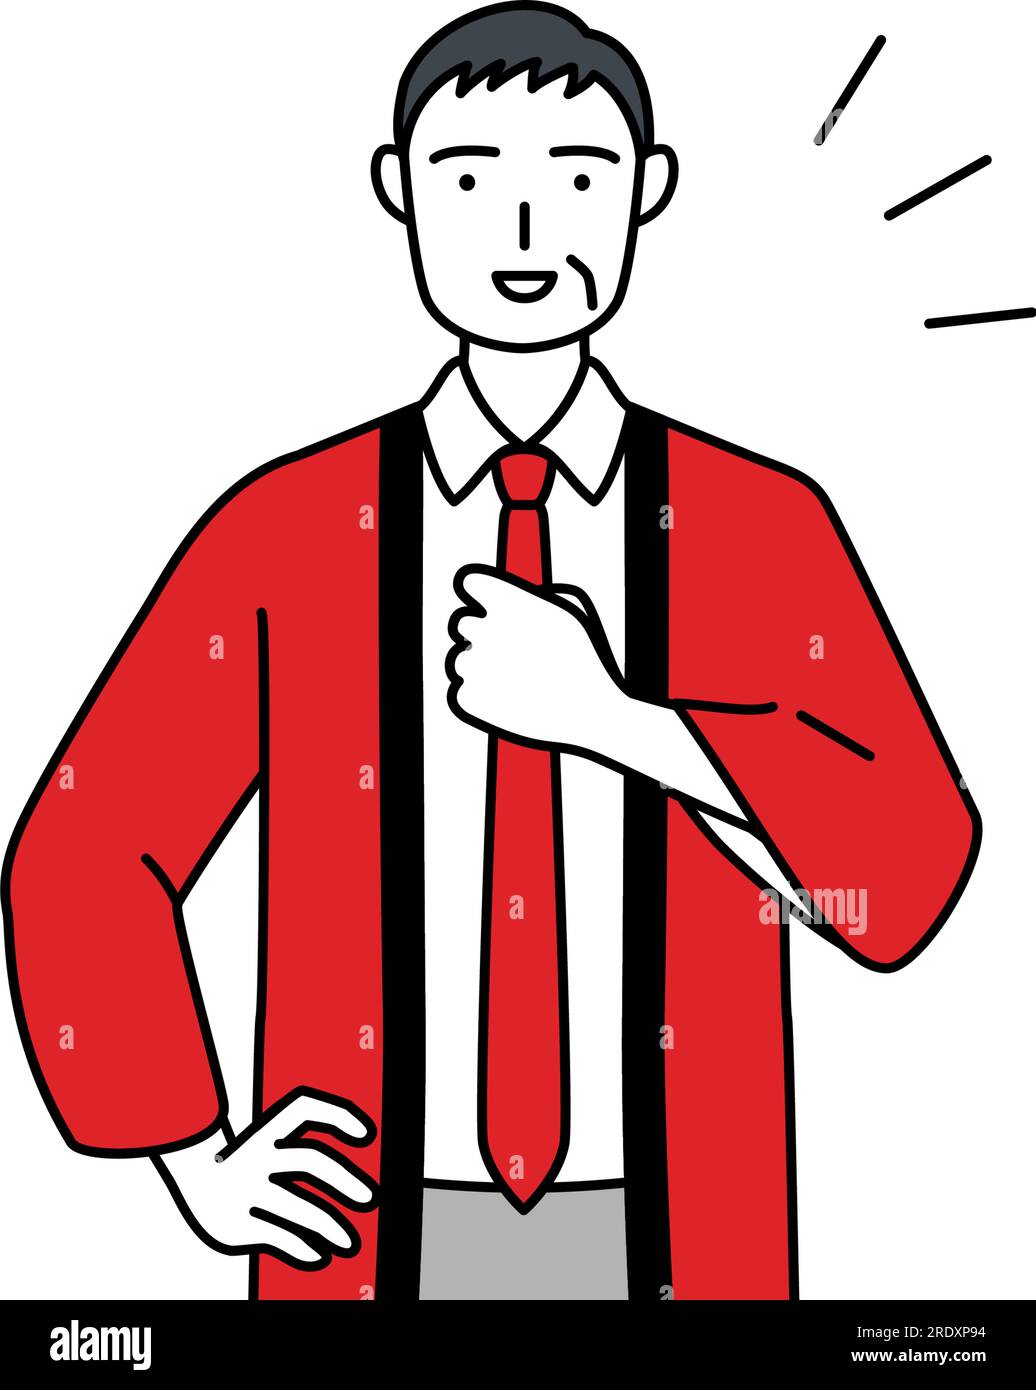 Senior man wearing a red happi coat tapping his chest, Vector Illustration Stock Vector